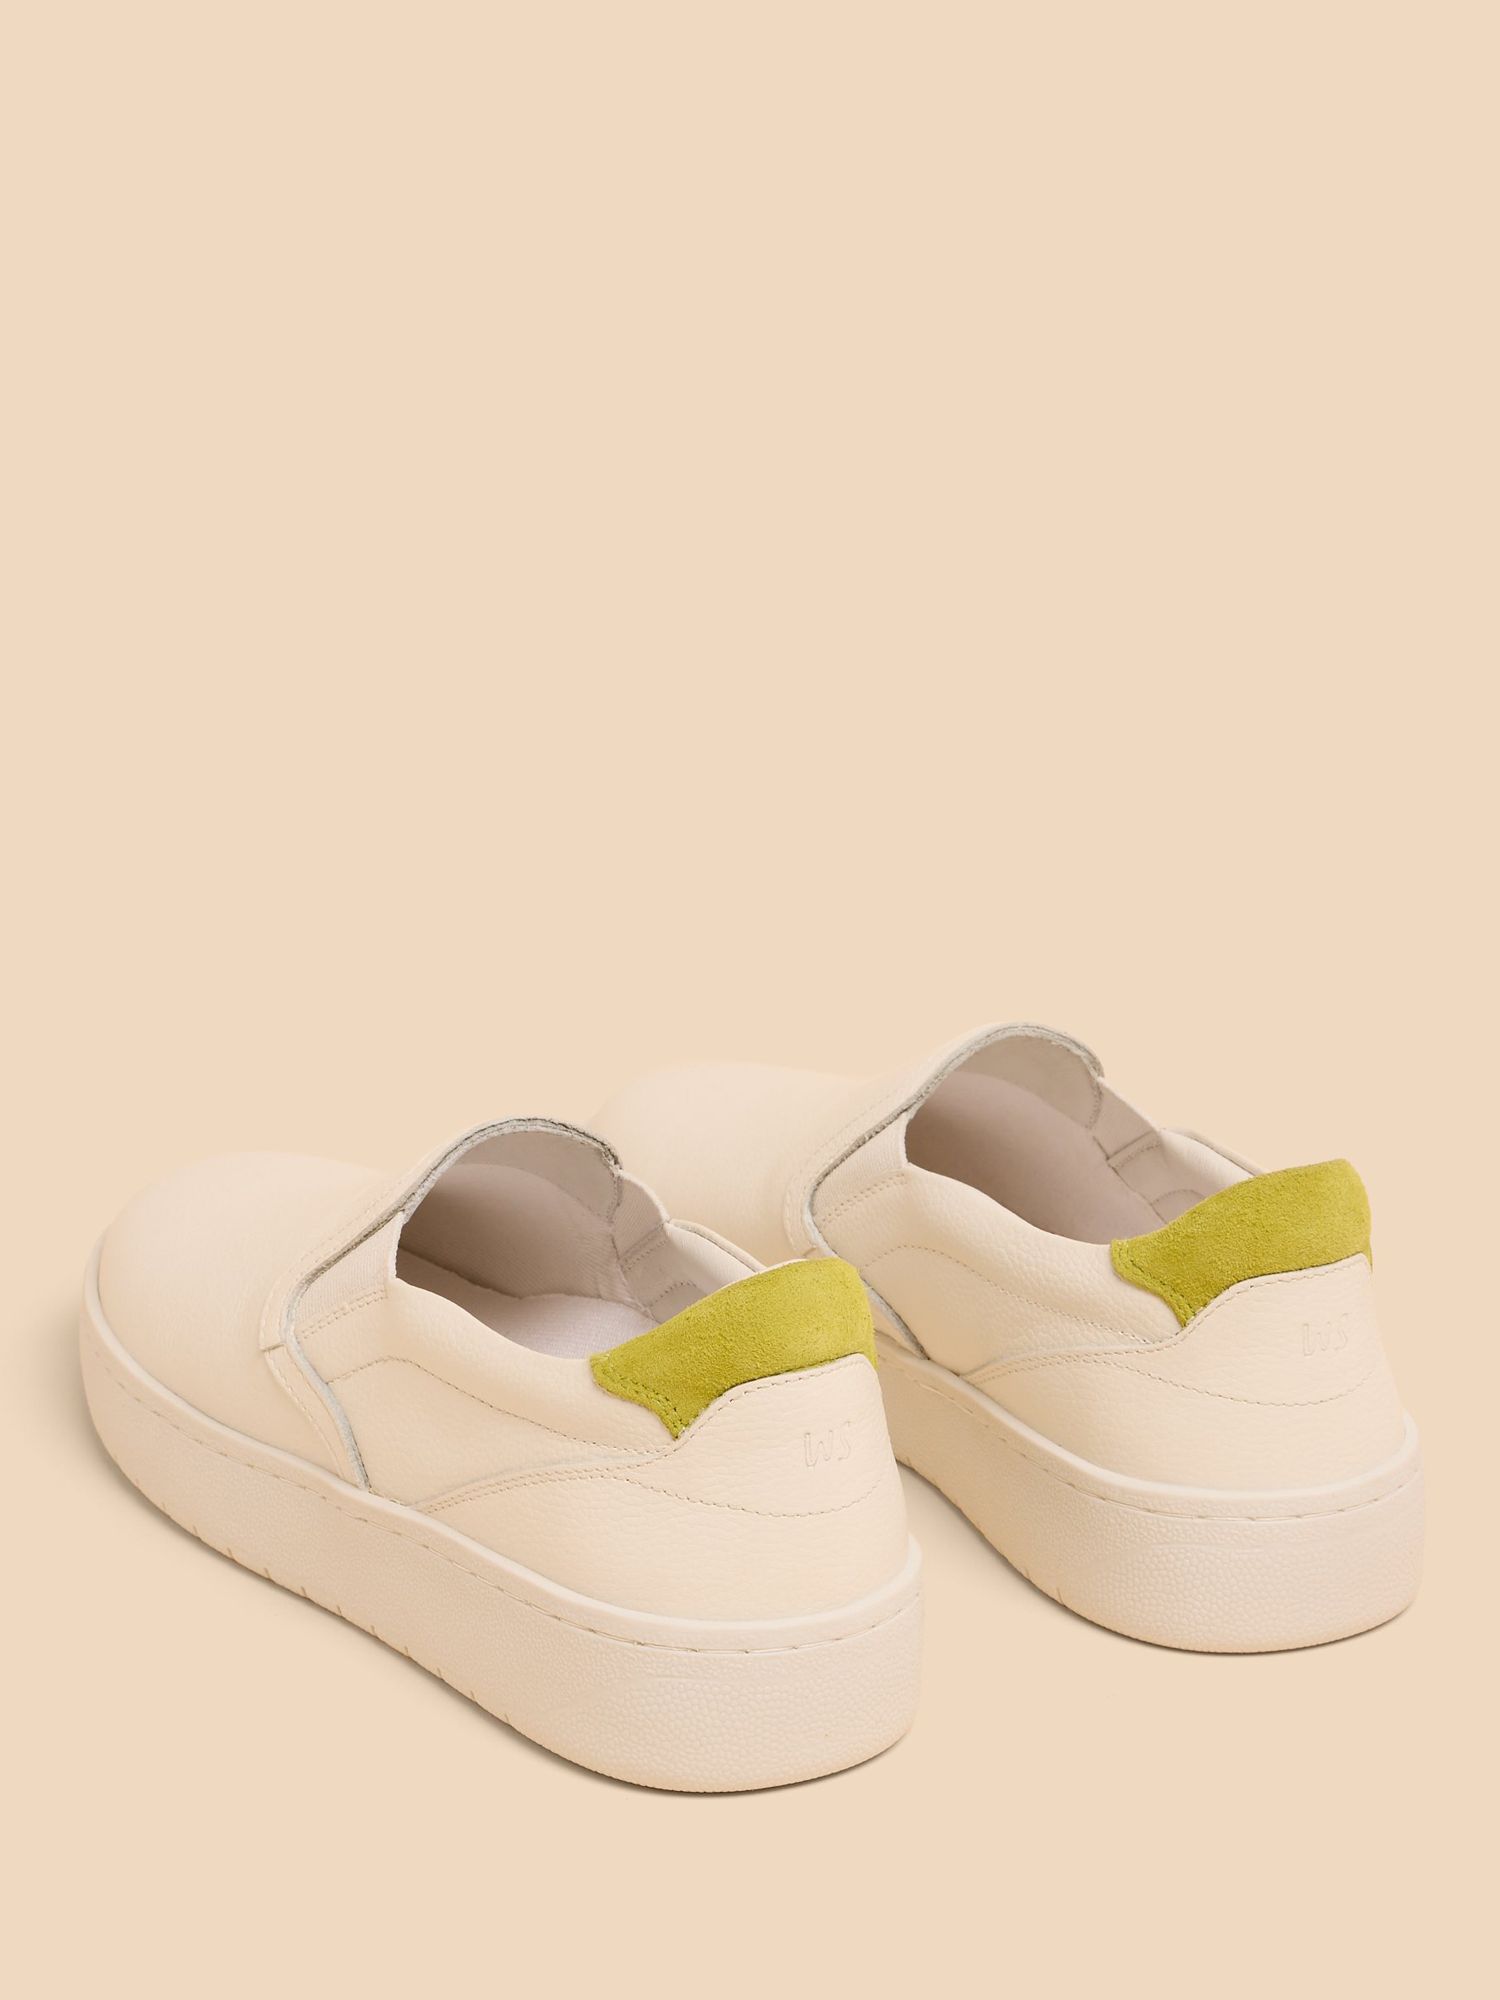 Buy White Stuff Leather Slip On Trainers, White Online at johnlewis.com